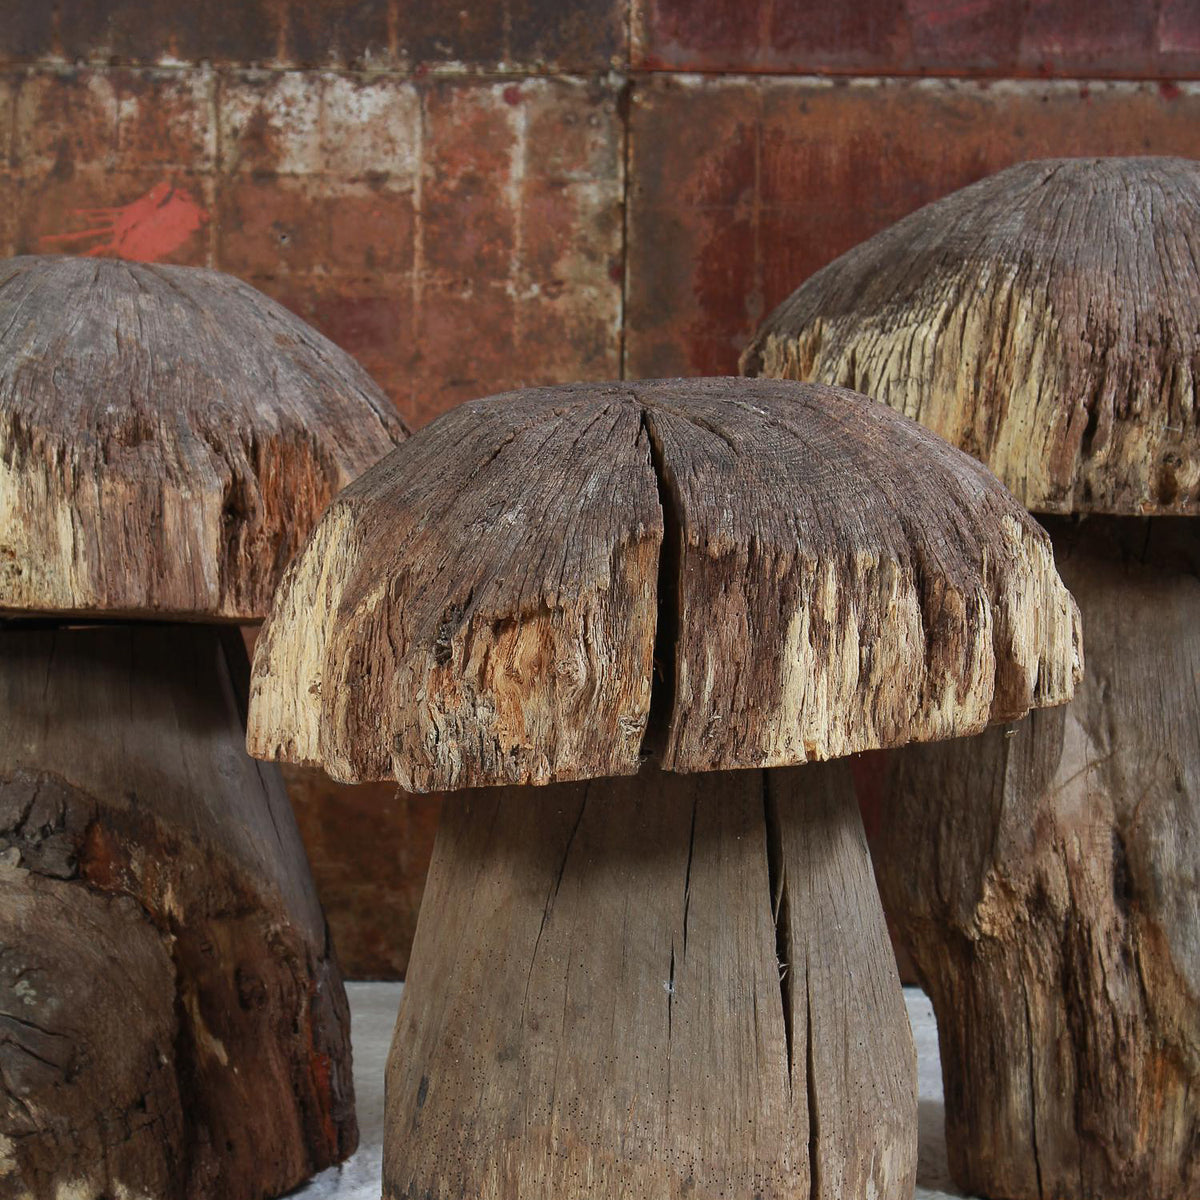 Collection of Three  Large Architectural Wooden Mushrooms